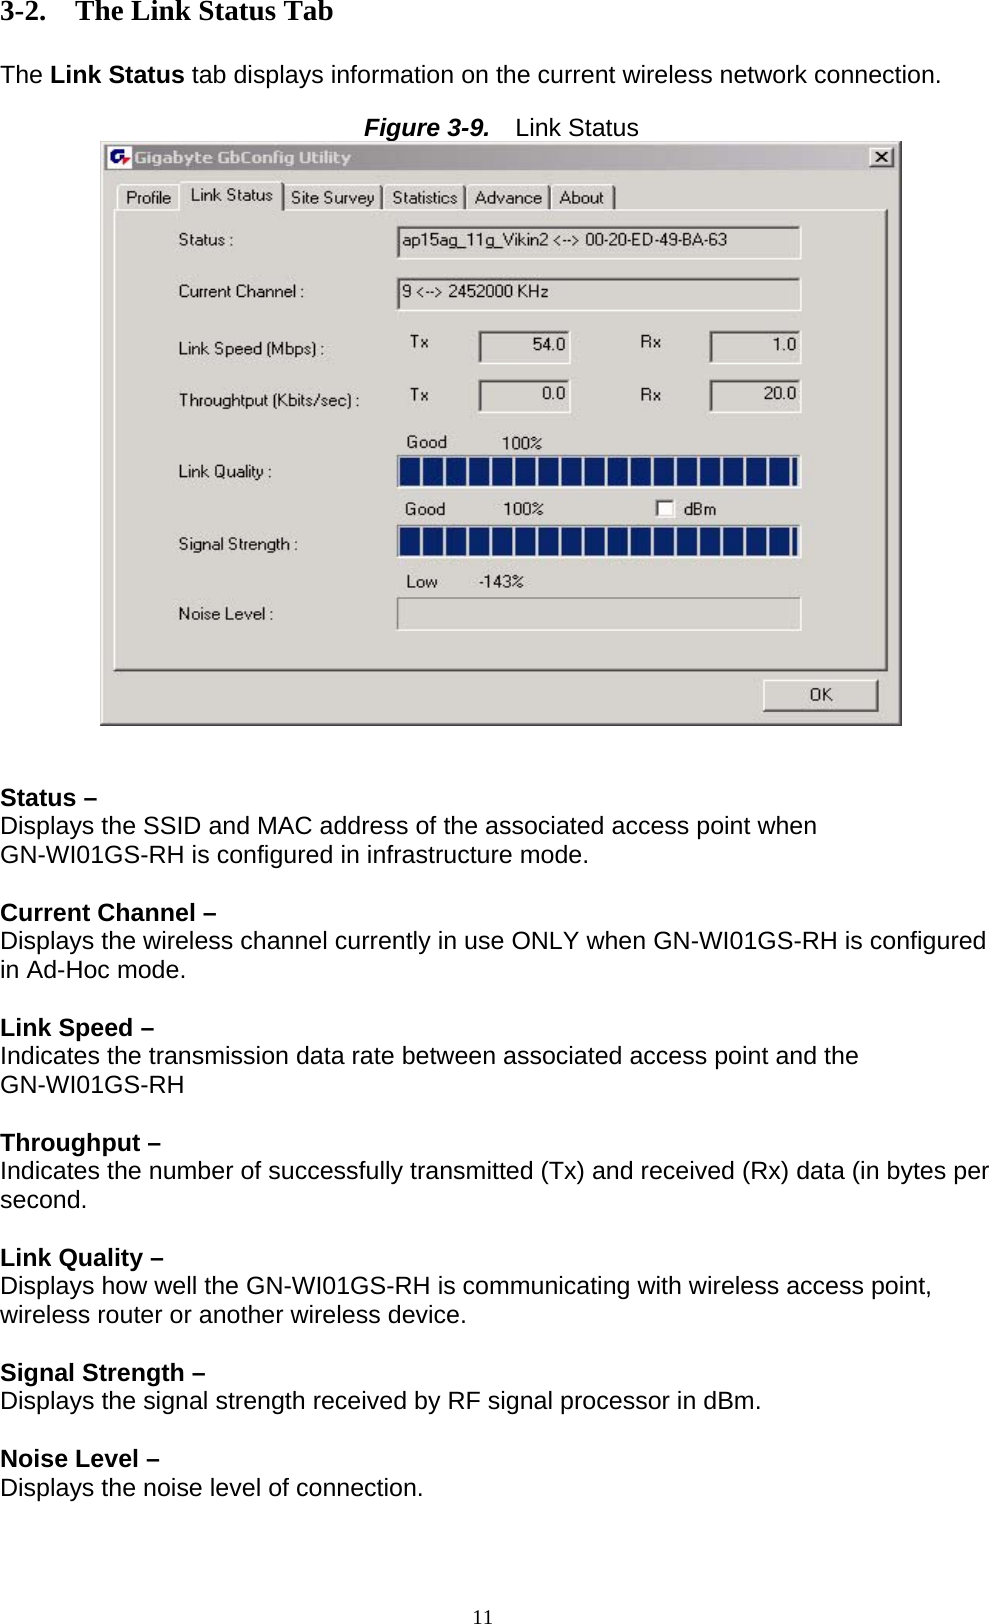 11  3-2. The Link Status Tab  The Link Status tab displays information on the current wireless network connection.  Figure 3-9.   Link Status    Status –   Displays the SSID and MAC address of the associated access point when GN-WI01GS-RH is configured in infrastructure mode.  Current Channel – Displays the wireless channel currently in use ONLY when GN-WI01GS-RH is configured in Ad-Hoc mode.  Link Speed –   Indicates the transmission data rate between associated access point and the GN-WI01GS-RH  Throughput –   Indicates the number of successfully transmitted (Tx) and received (Rx) data (in bytes per second.  Link Quality – Displays how well the GN-WI01GS-RH is communicating with wireless access point, wireless router or another wireless device.  Signal Strength –   Displays the signal strength received by RF signal processor in dBm.  Noise Level – Displays the noise level of connection.   